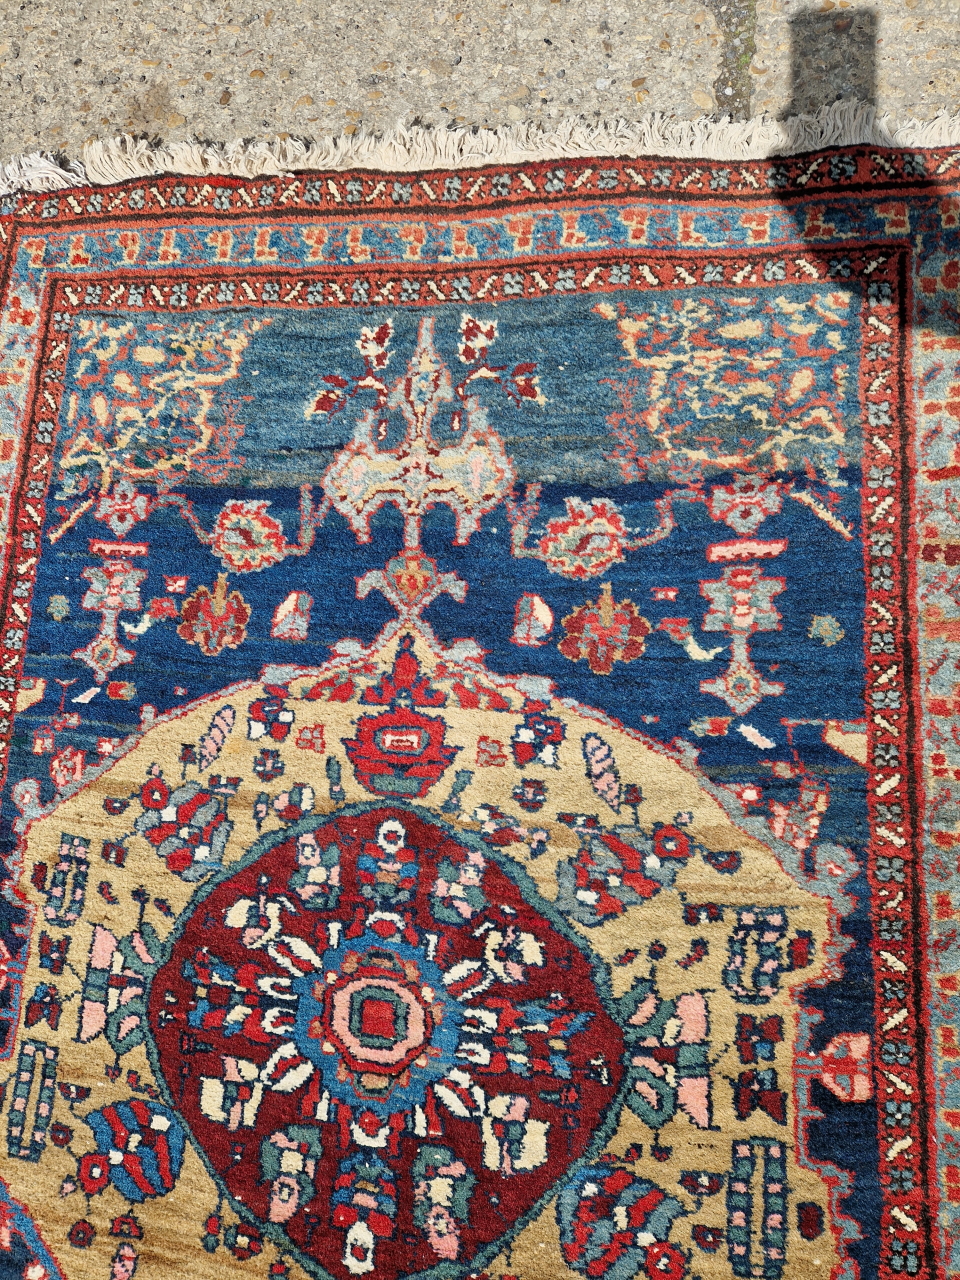 A NEAR PAIR OF PERSIAN TRIBAL COUNTRY HOUSE RUNNERS 530 x 94 cm AND 515 x 101 (2) - Image 12 of 13